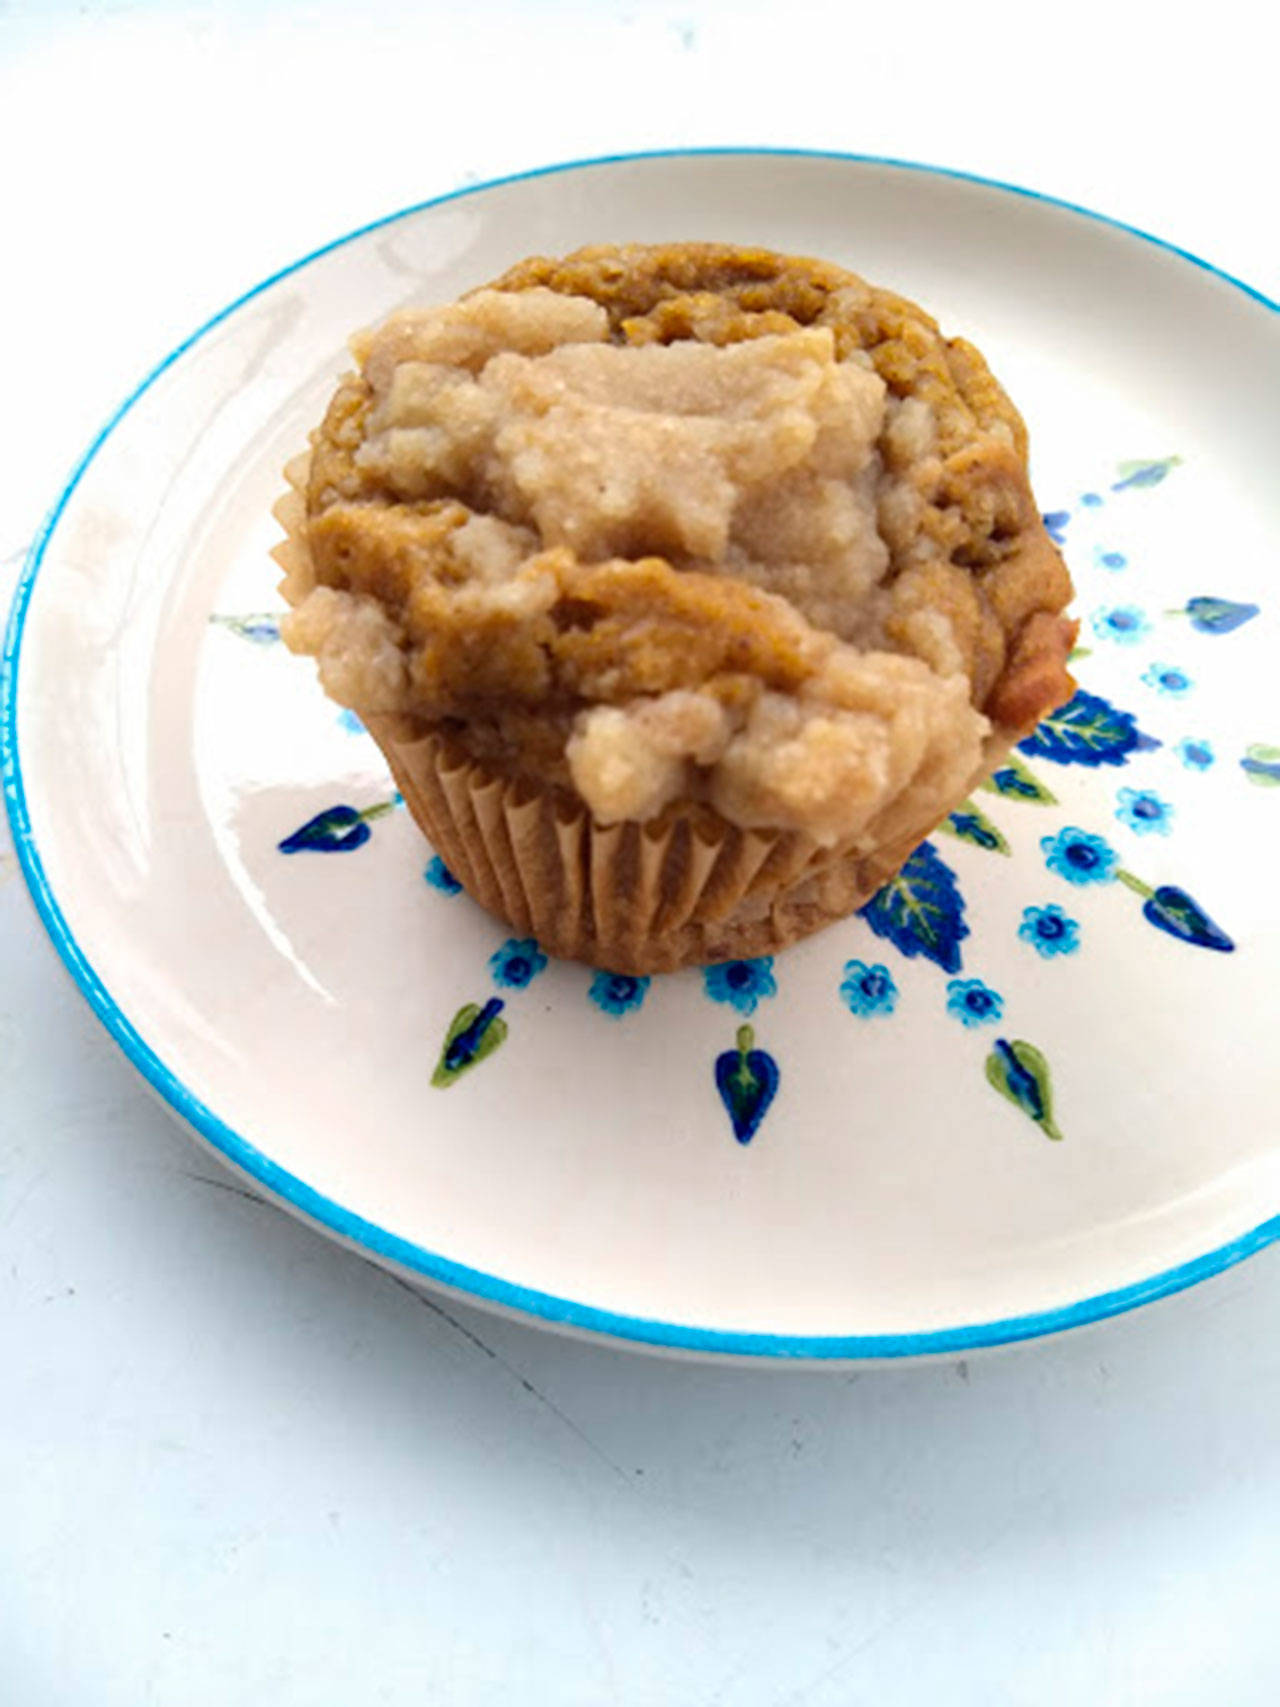 A pumpkin crumb muffin sits ready for eating. (Carrie Sanford/for Peninsula Daily News)